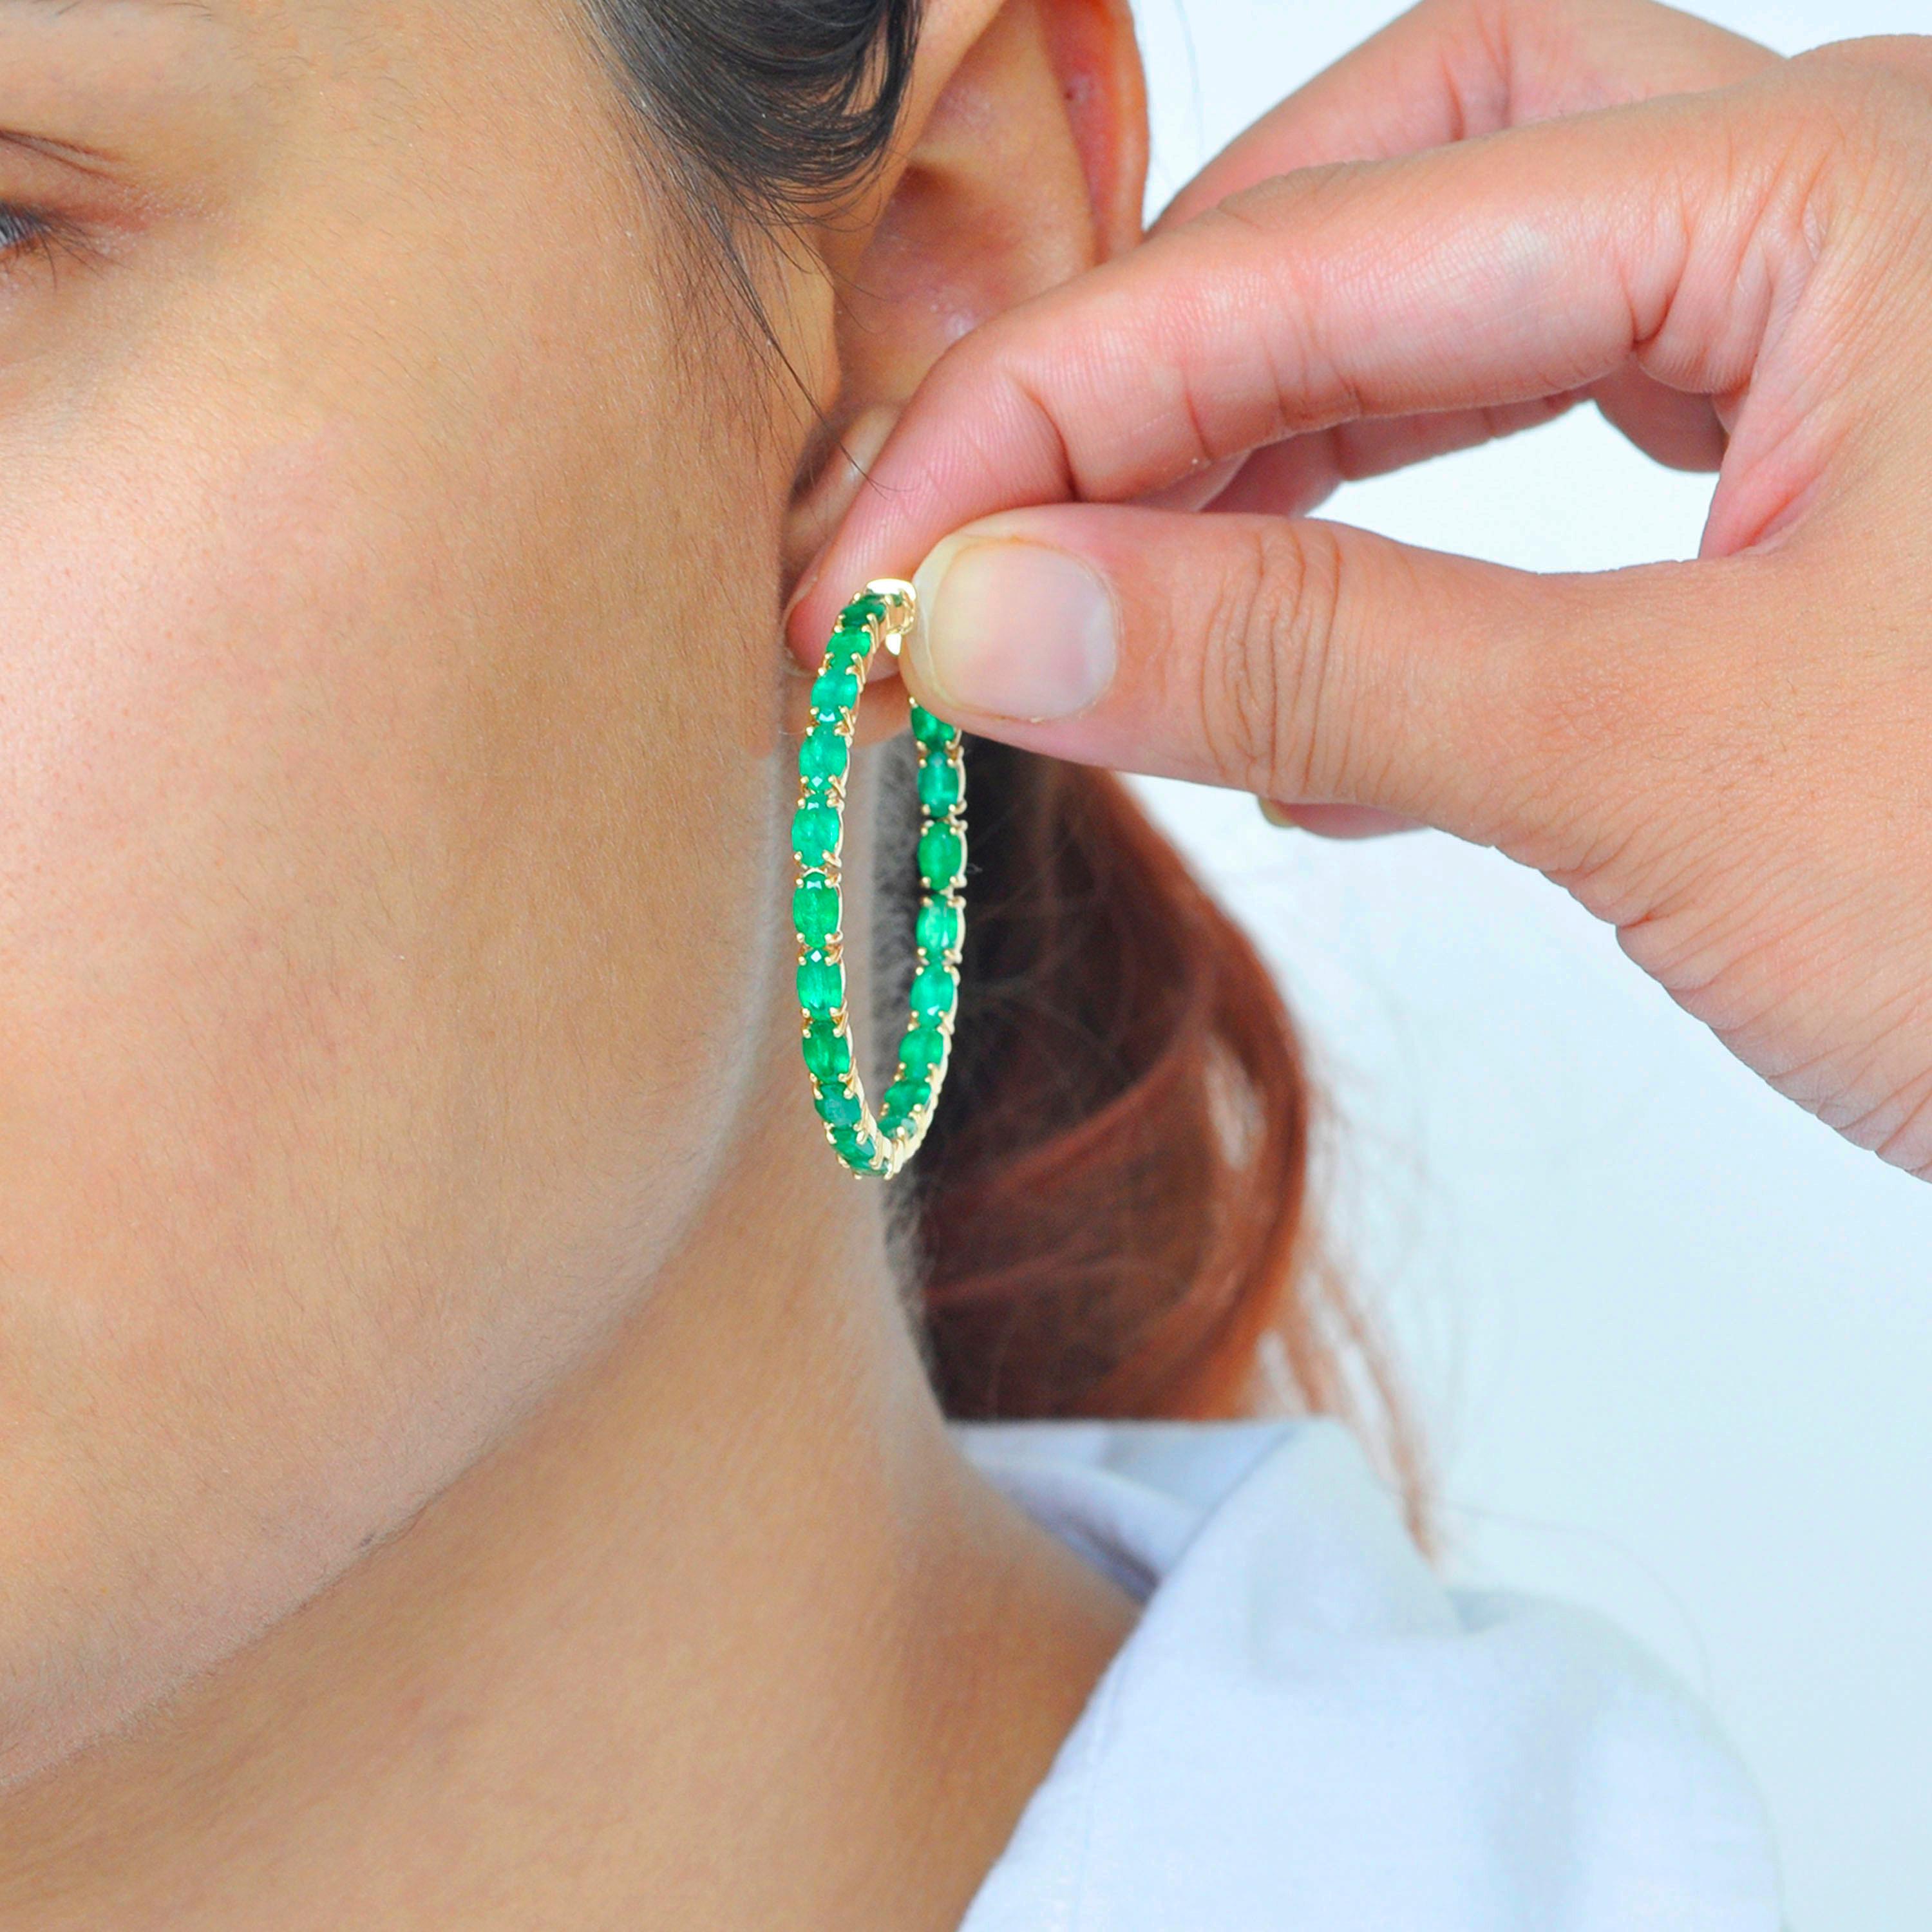 18 karat yellow gold 8.62 carats oval zambian emeralds hoop earrings. 

This enchanting lush green zambian emeralds full hoop earring is impressive. The hoop is created with 40 perfect matching oval cut emeralds of size 5x3 mm each. The emeralds